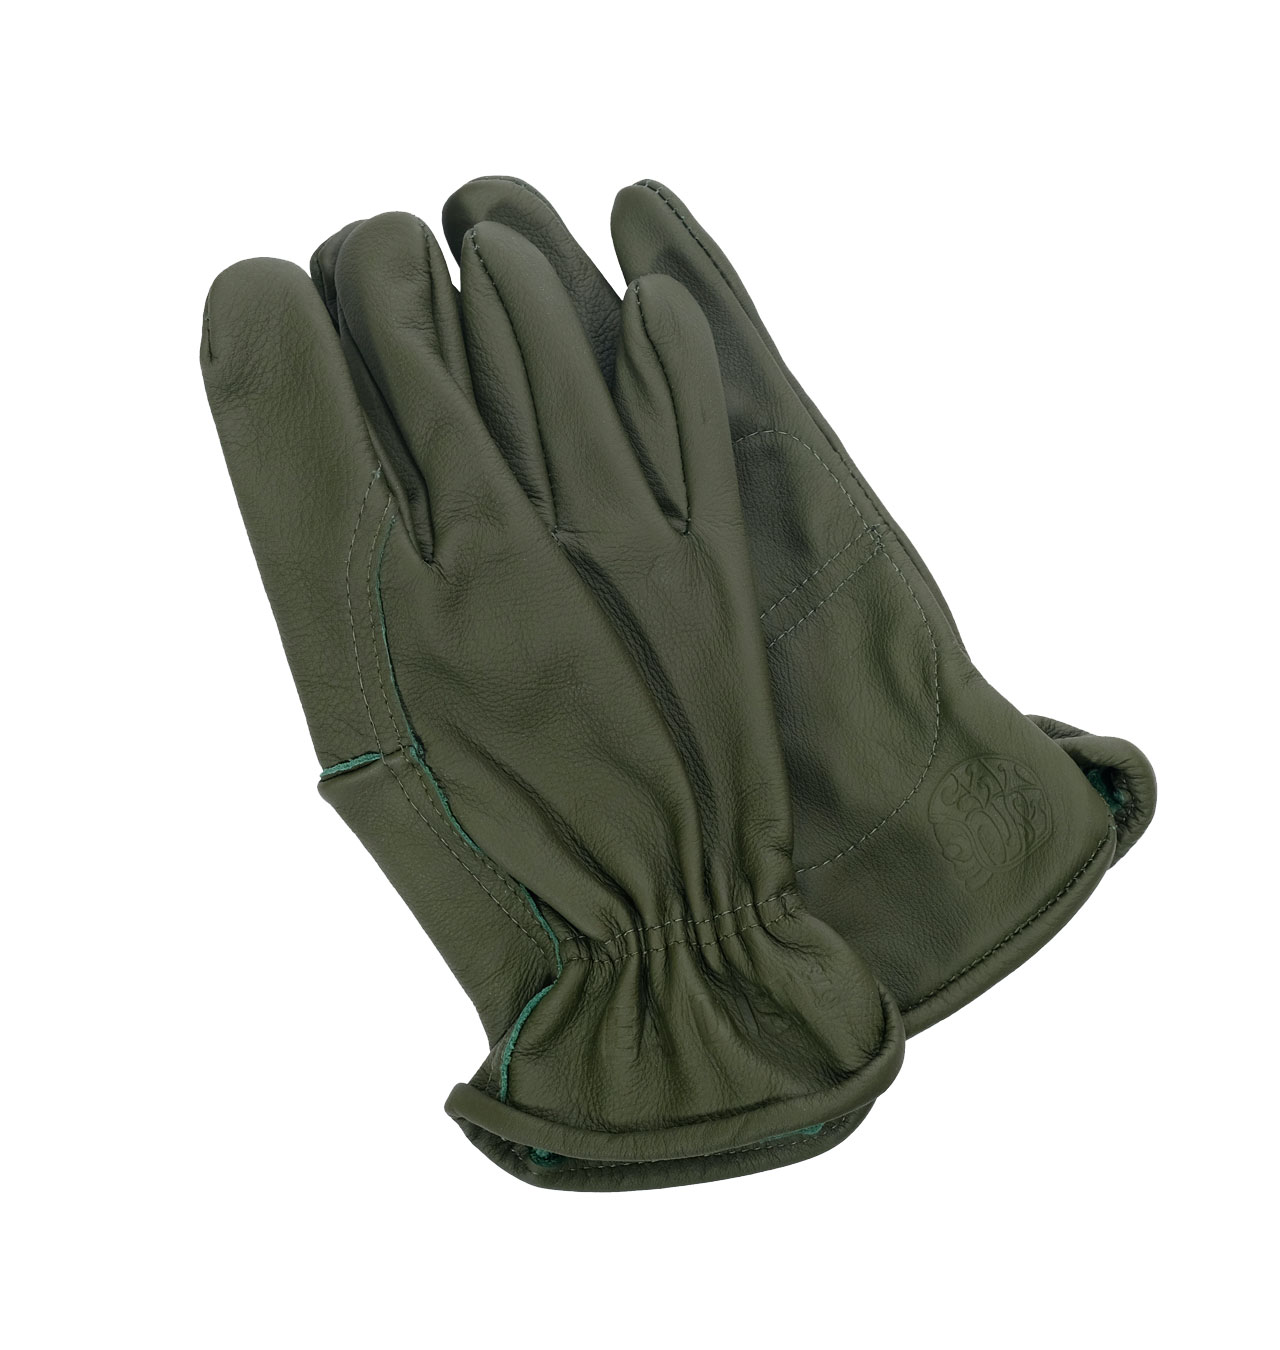 Eat-Dust---X-Power-Glove-Leather---Green-991